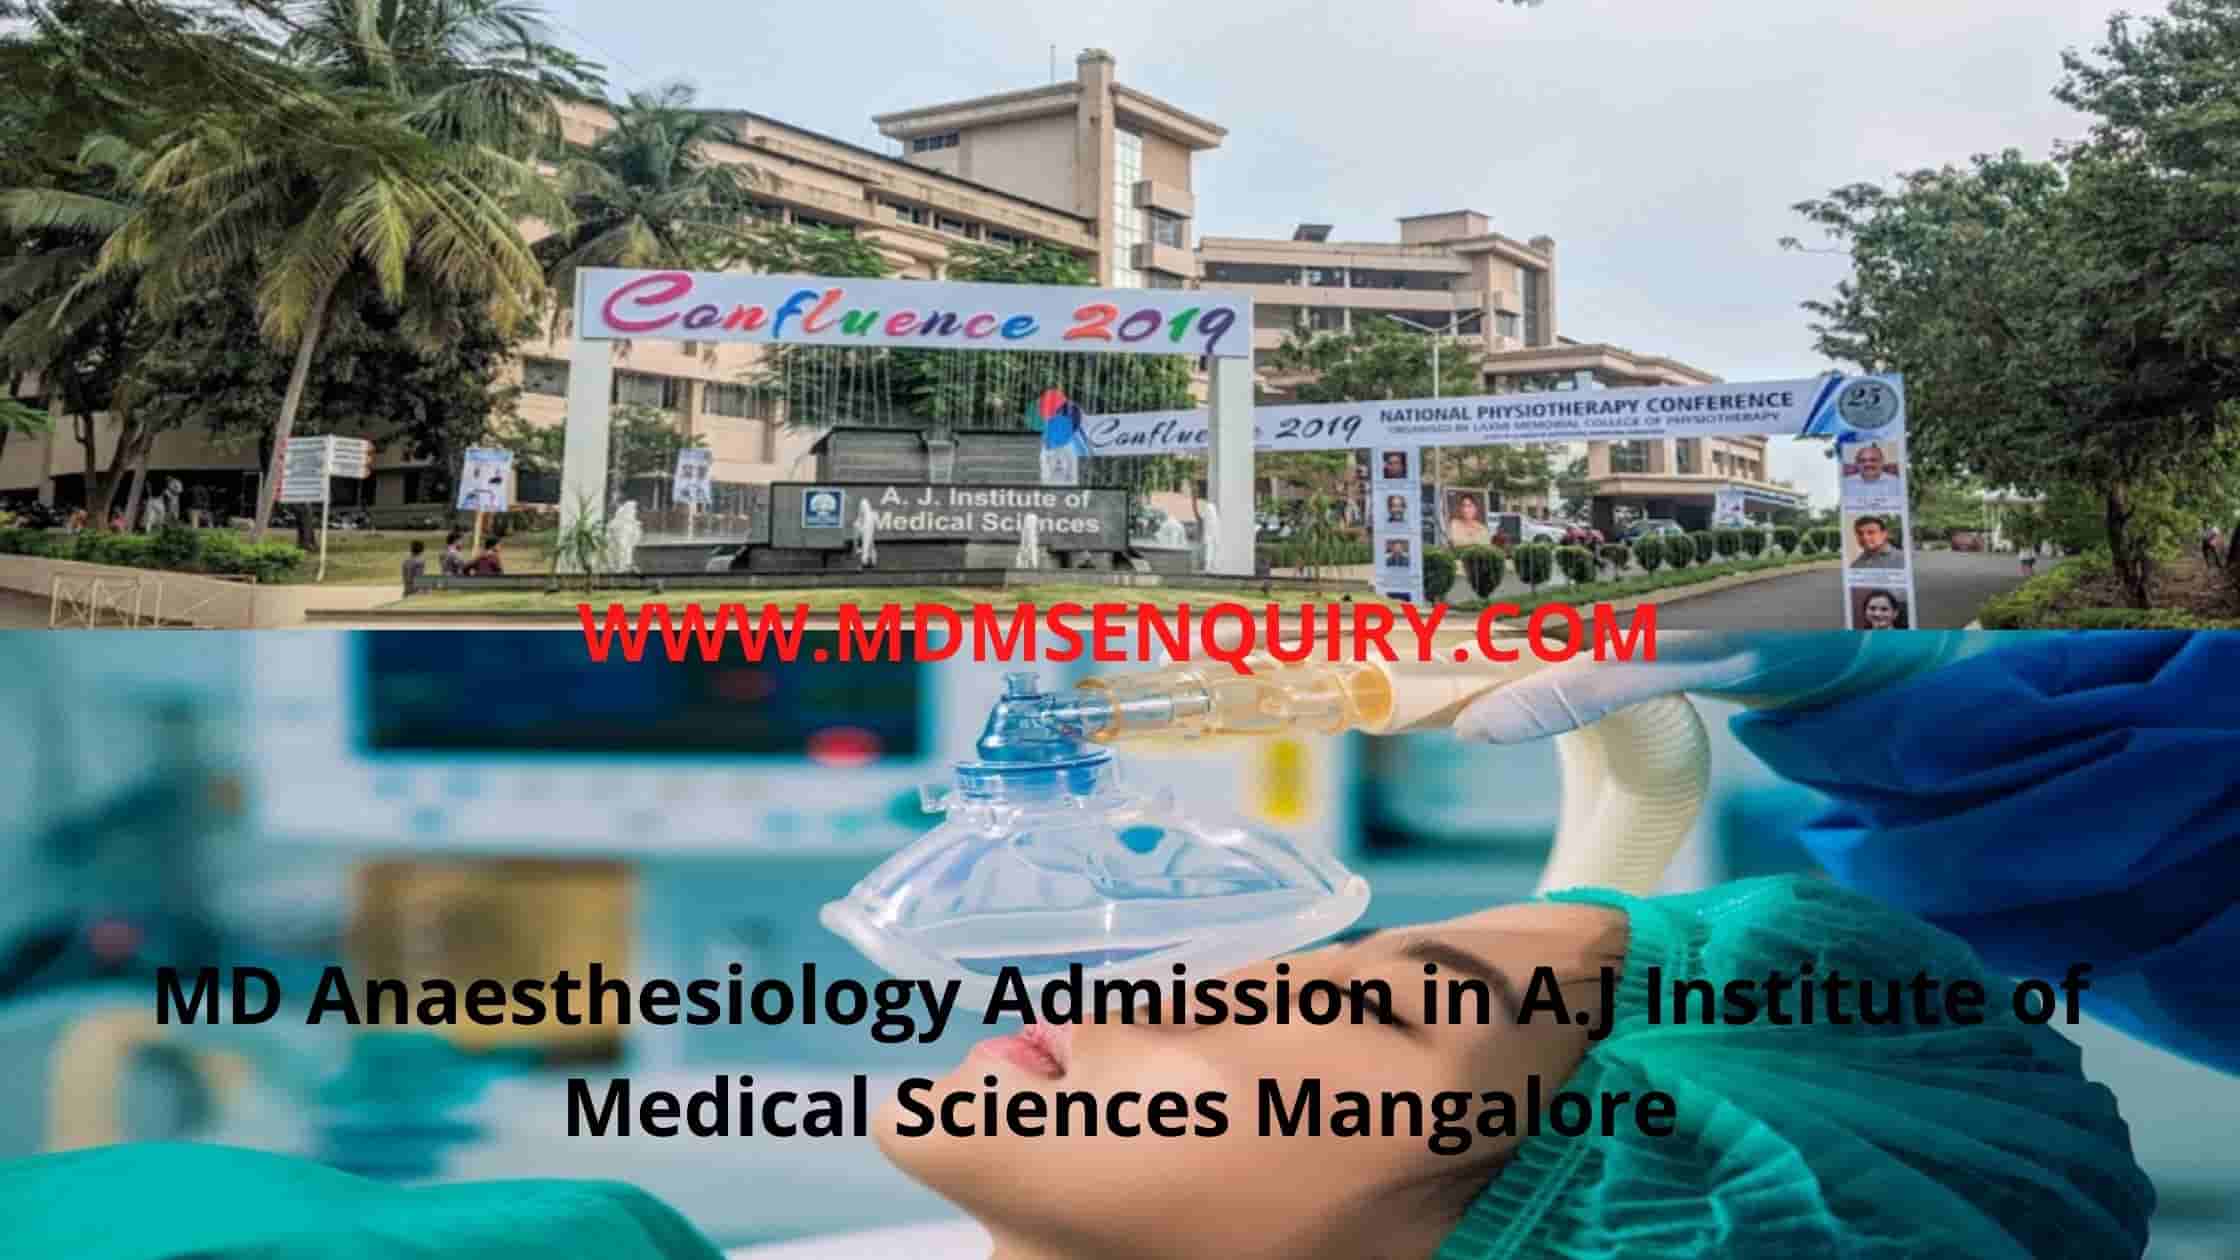 MD Anaesthesiology admission in A.J Institute of Medical Sciences Mangalore